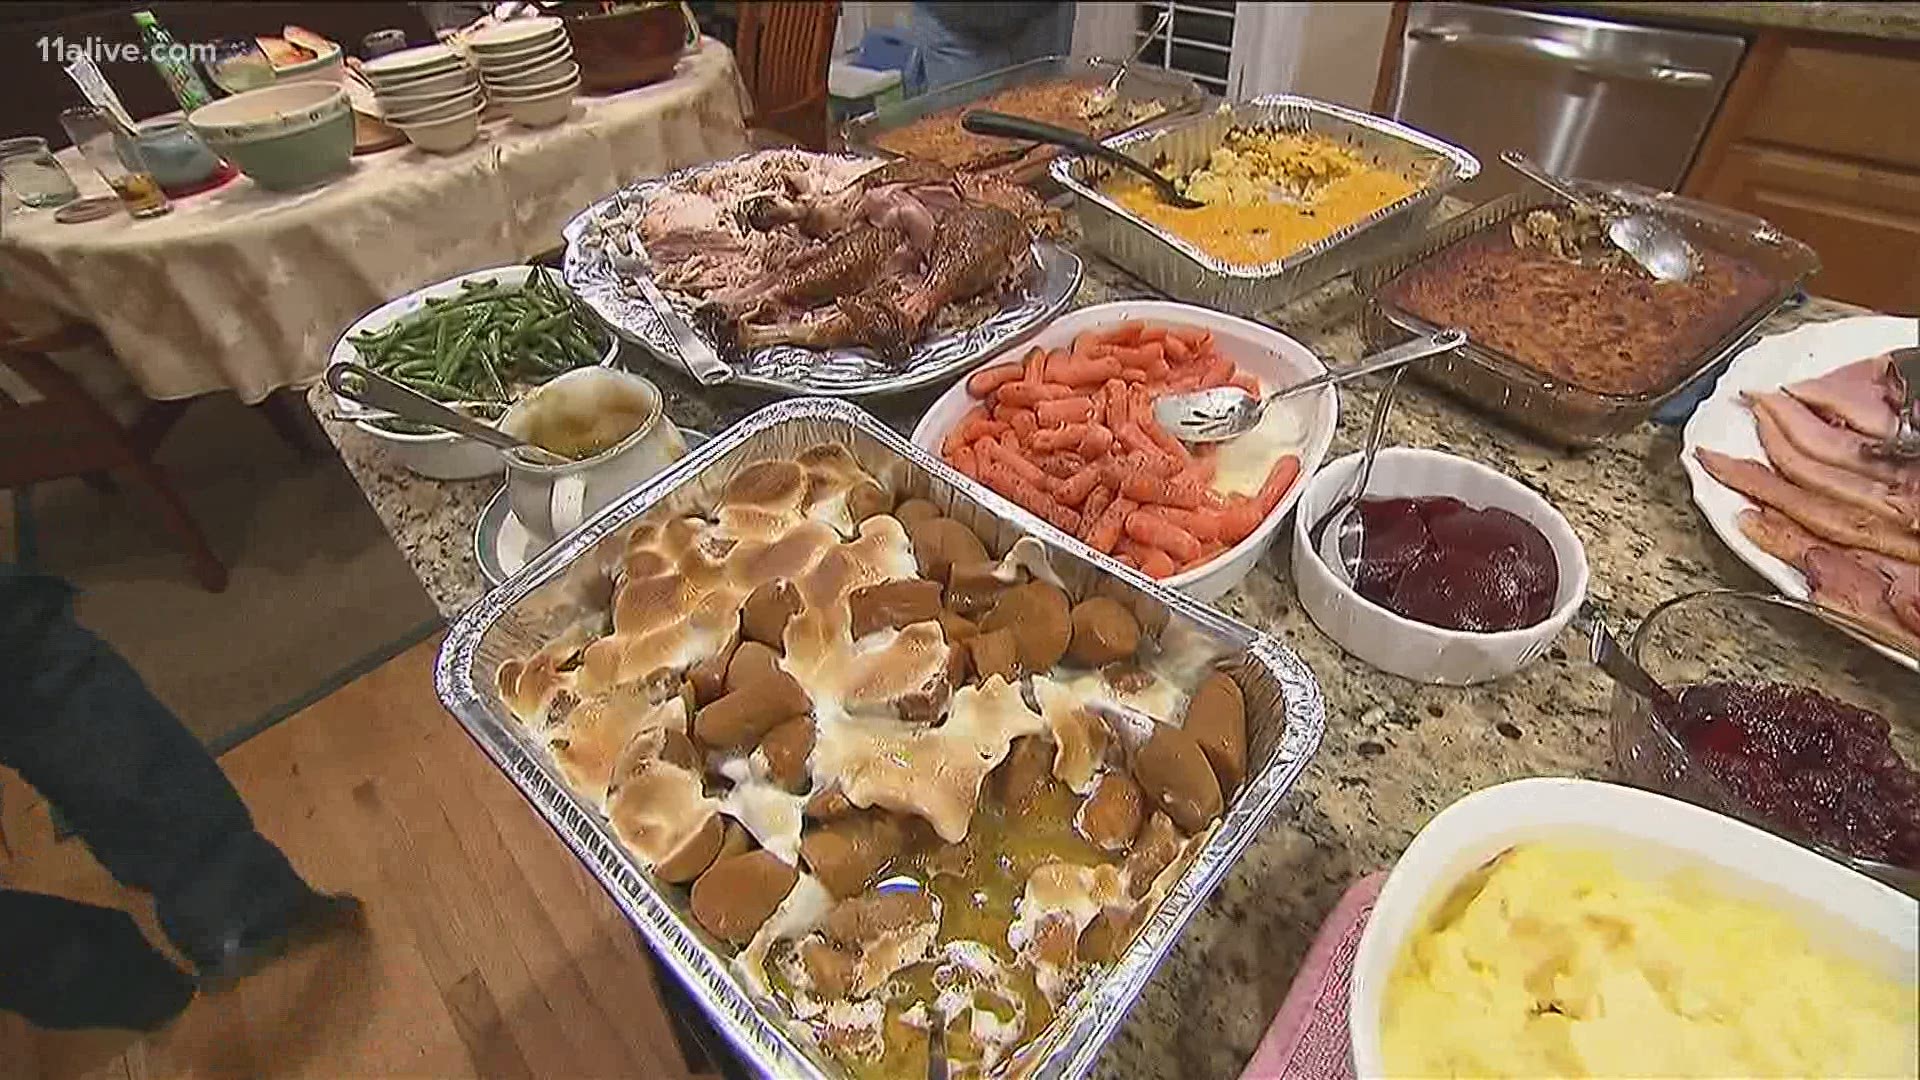 The CDC has issued some health and safety steps for Americans to take while celebrating Thanksgiving amid the pandemic.